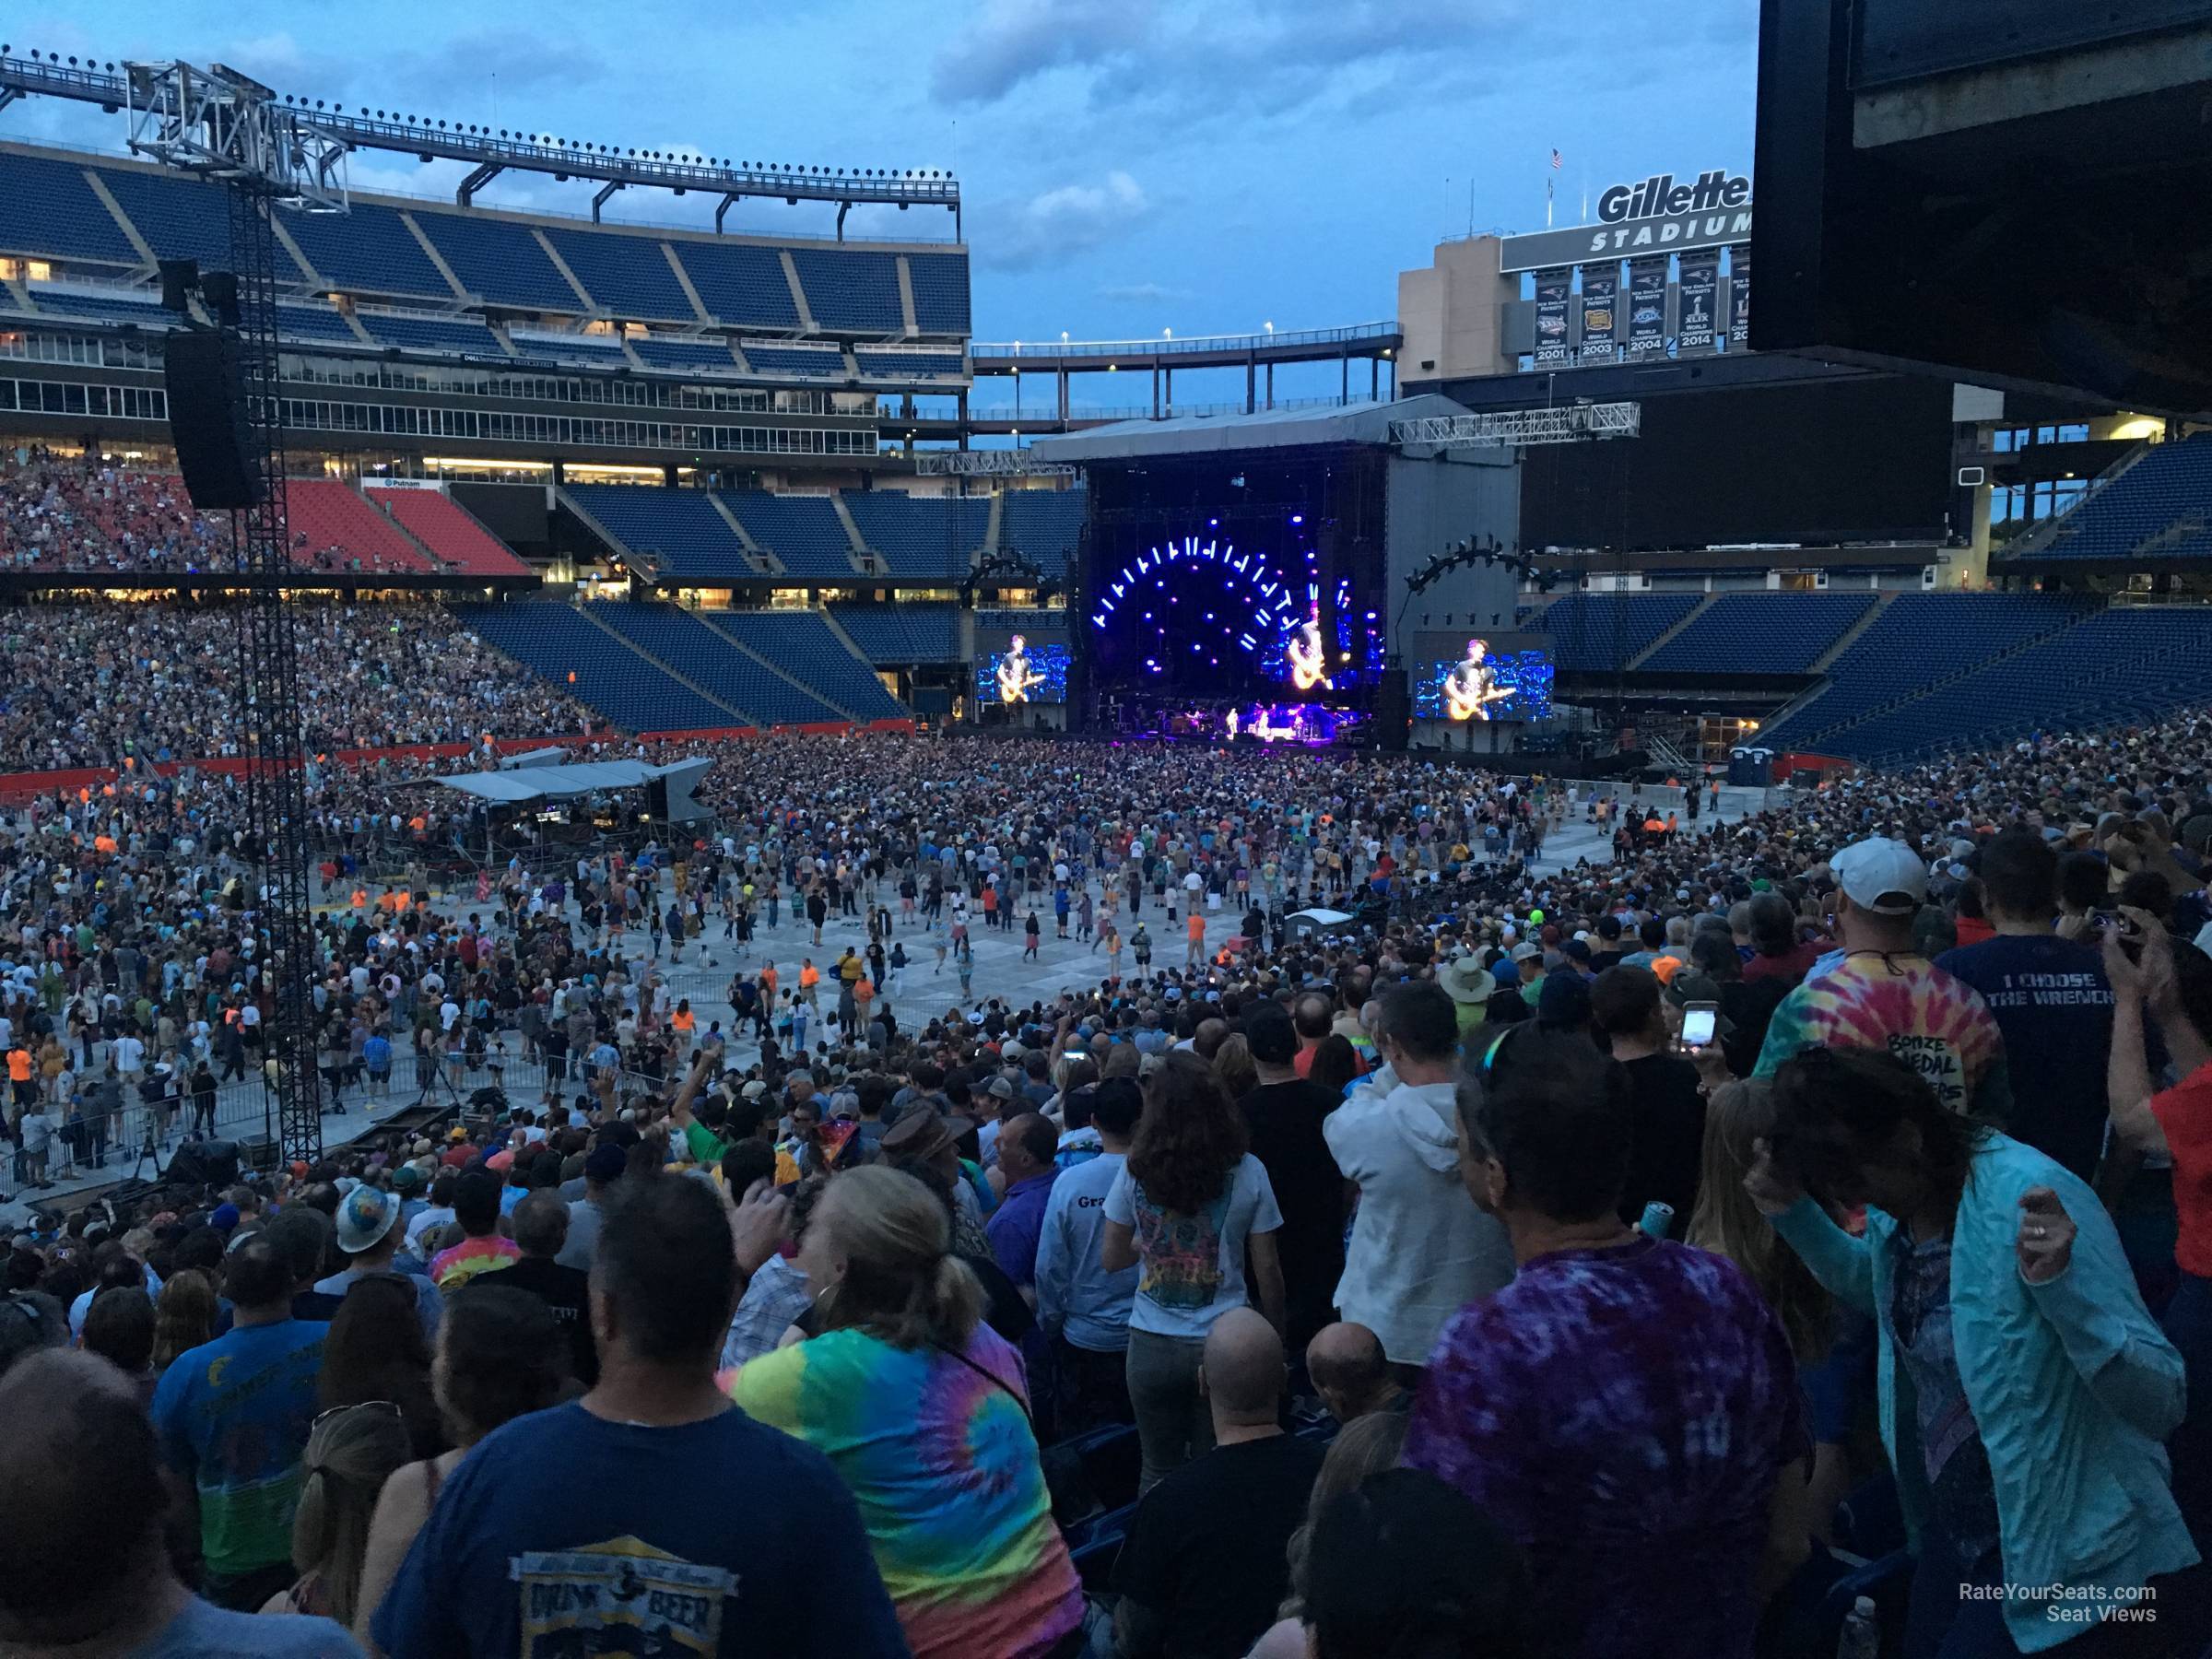 section 135, row 38 seat view  for concert - gillette stadium